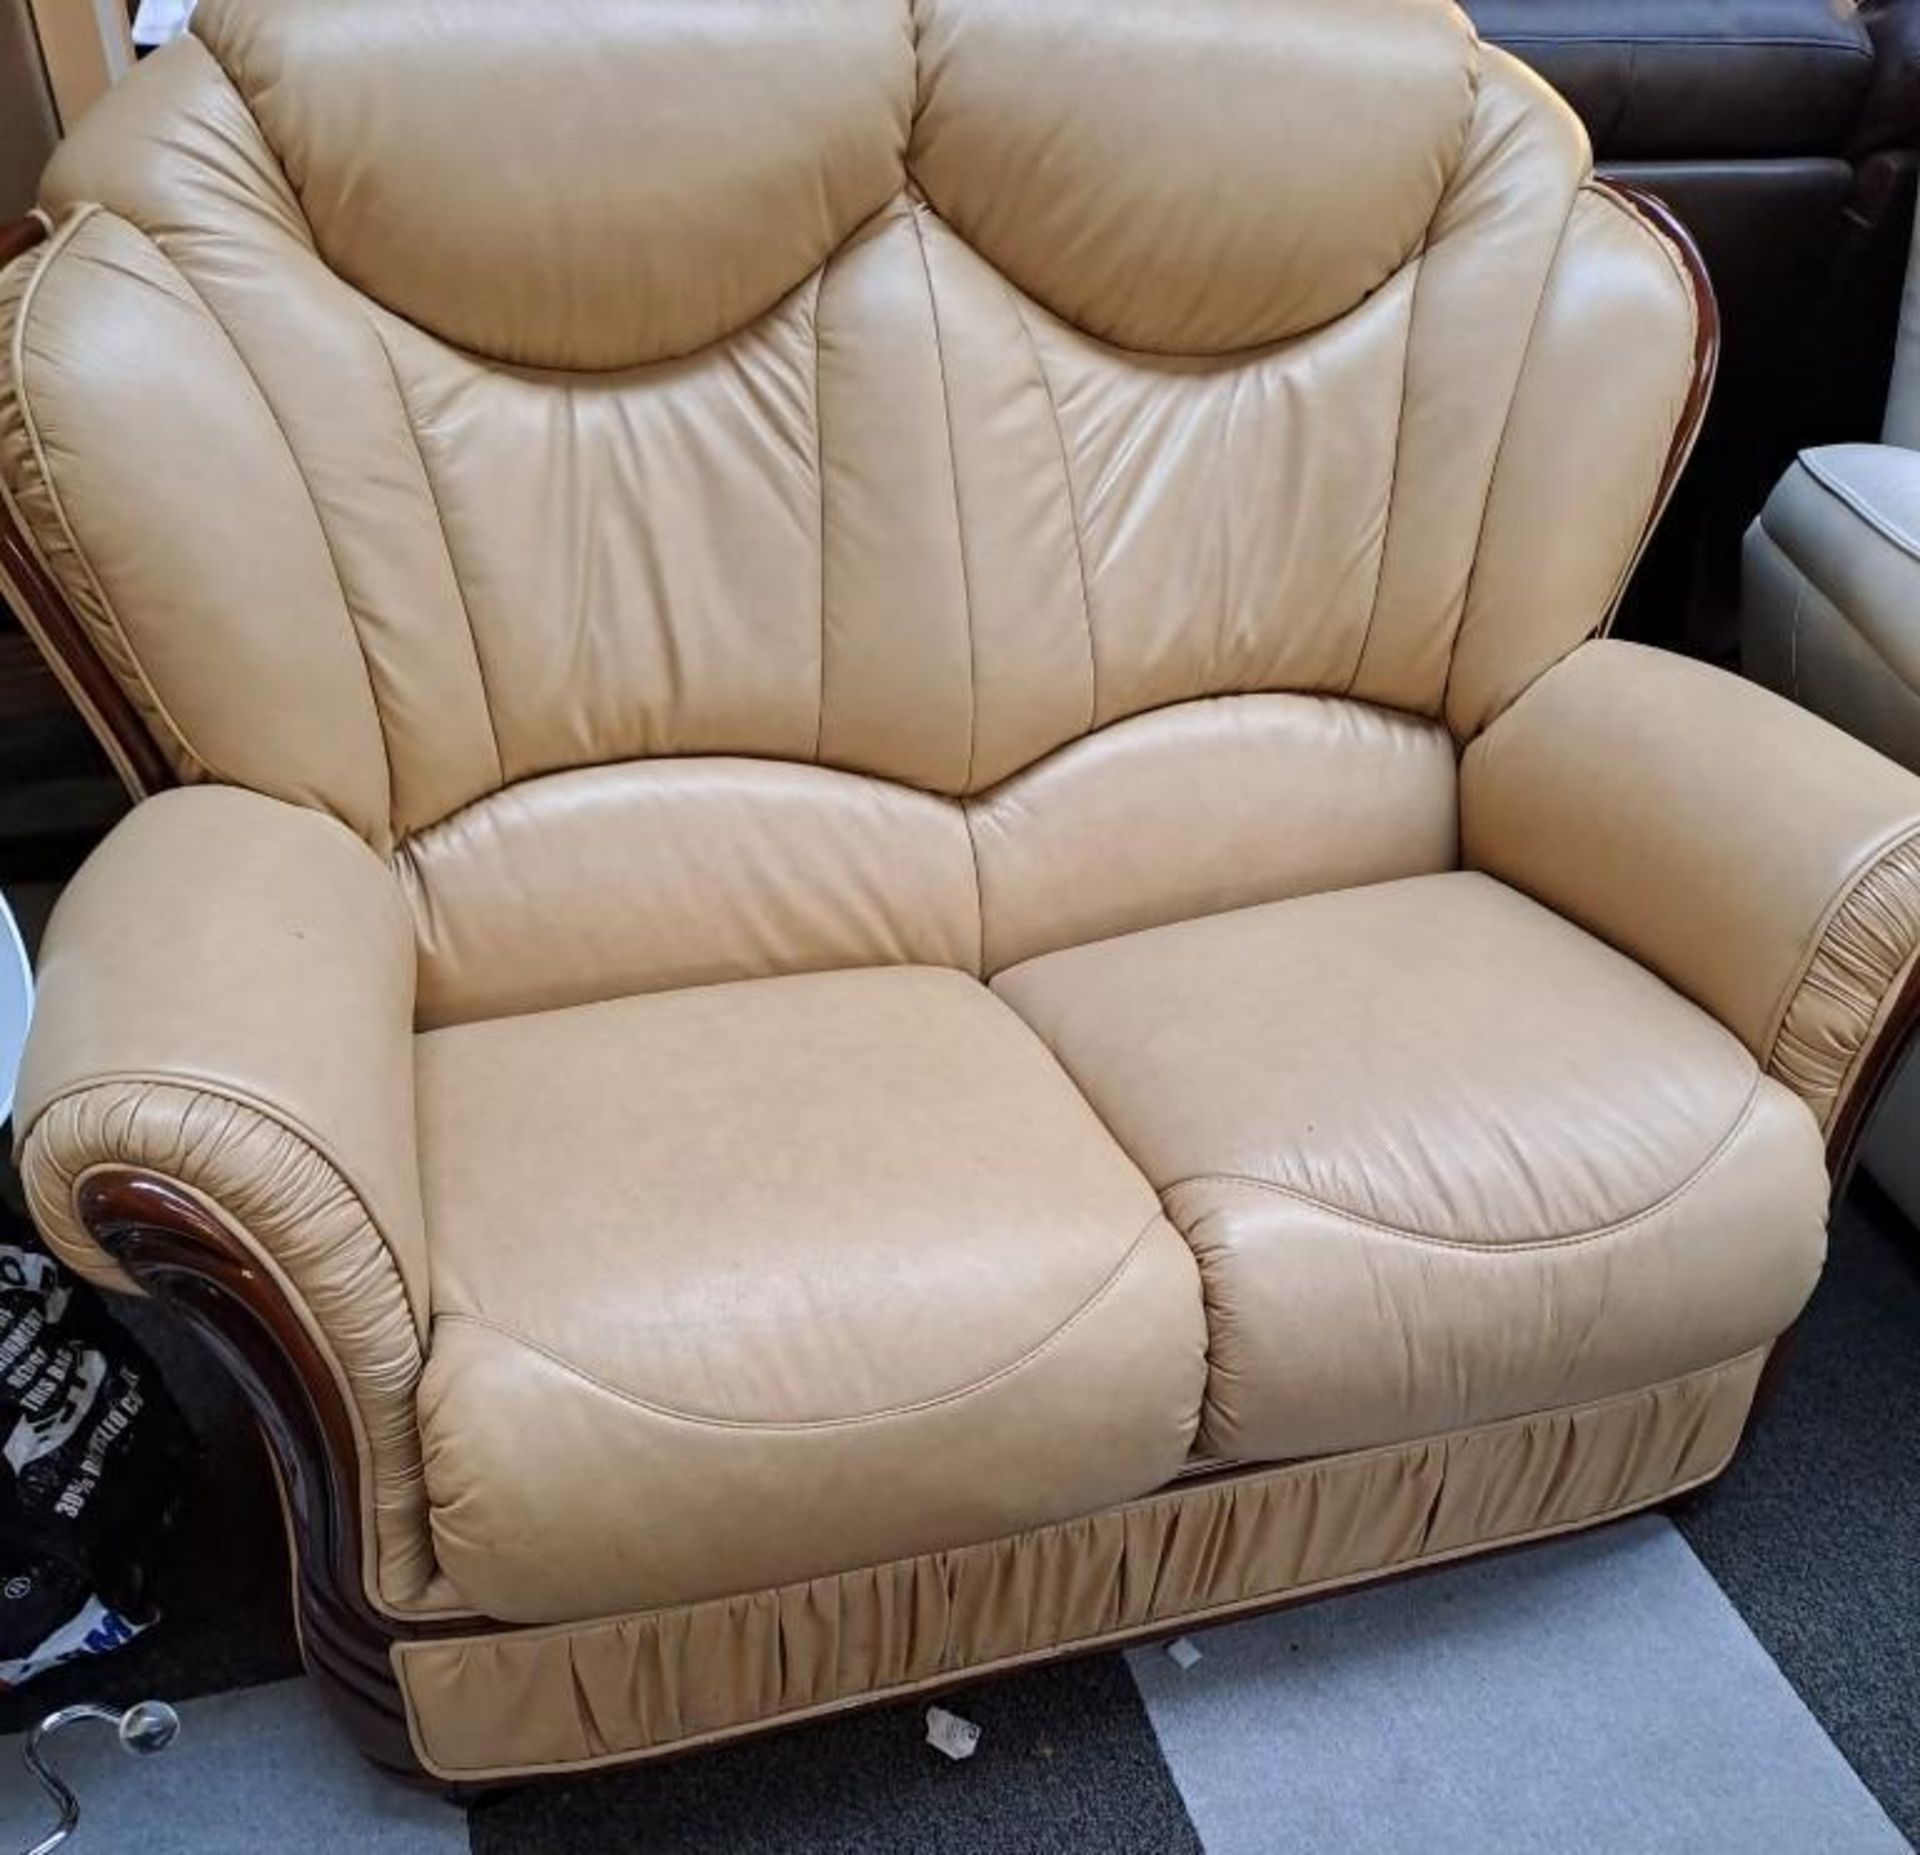 *EX DISPLAY* Vicenza 100% Italian leather 2 seater sofa in pearlized cream with walnut show wood